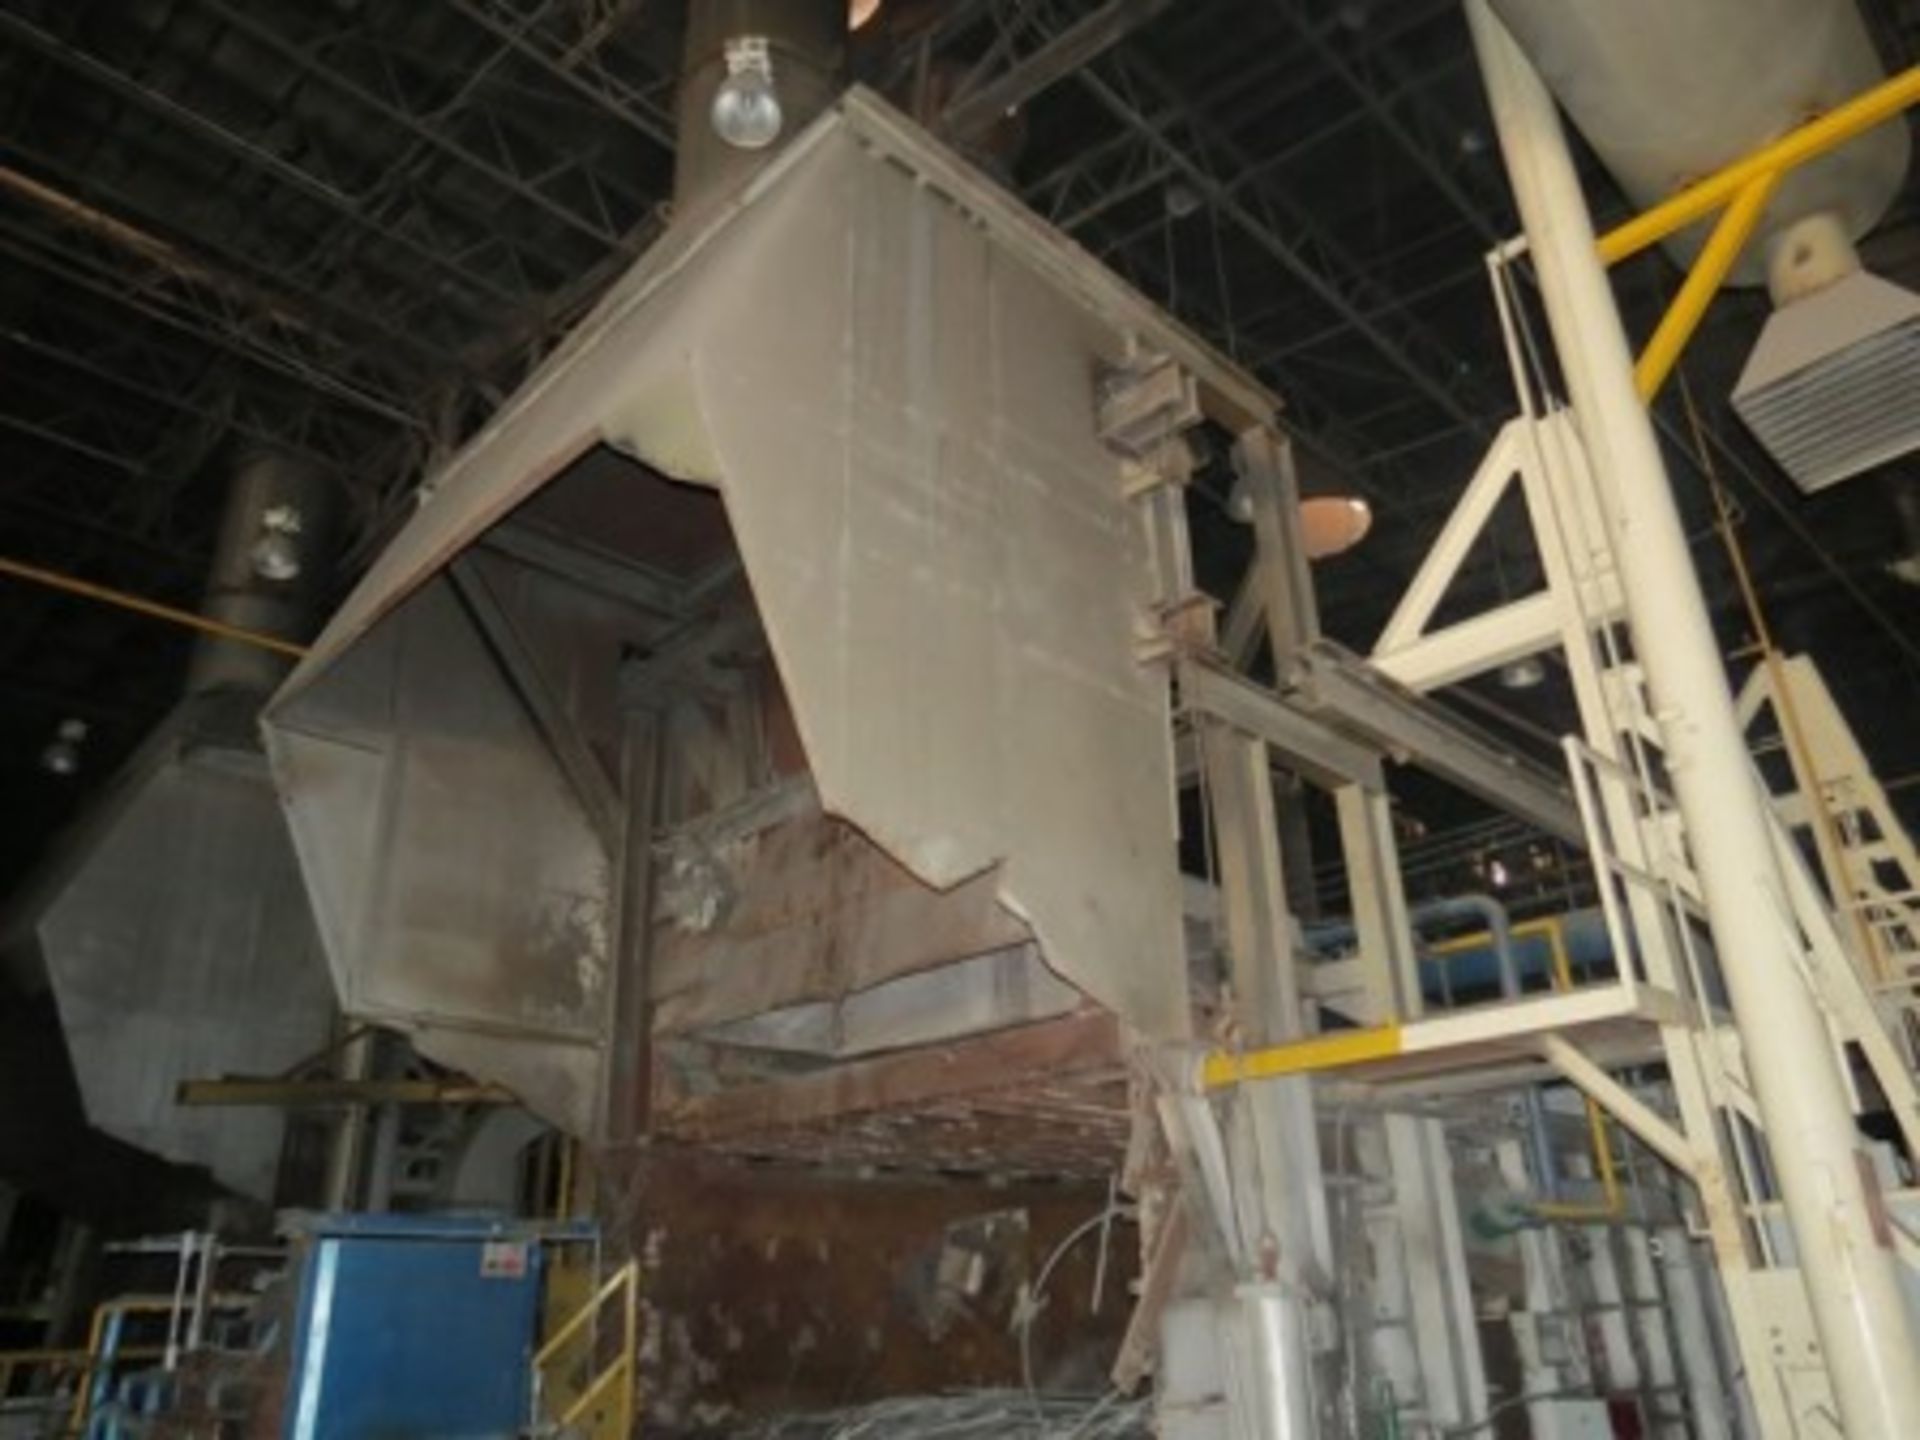 Melting furnace with dumper, hood and ductwork for gas extraction. - Image 18 of 28